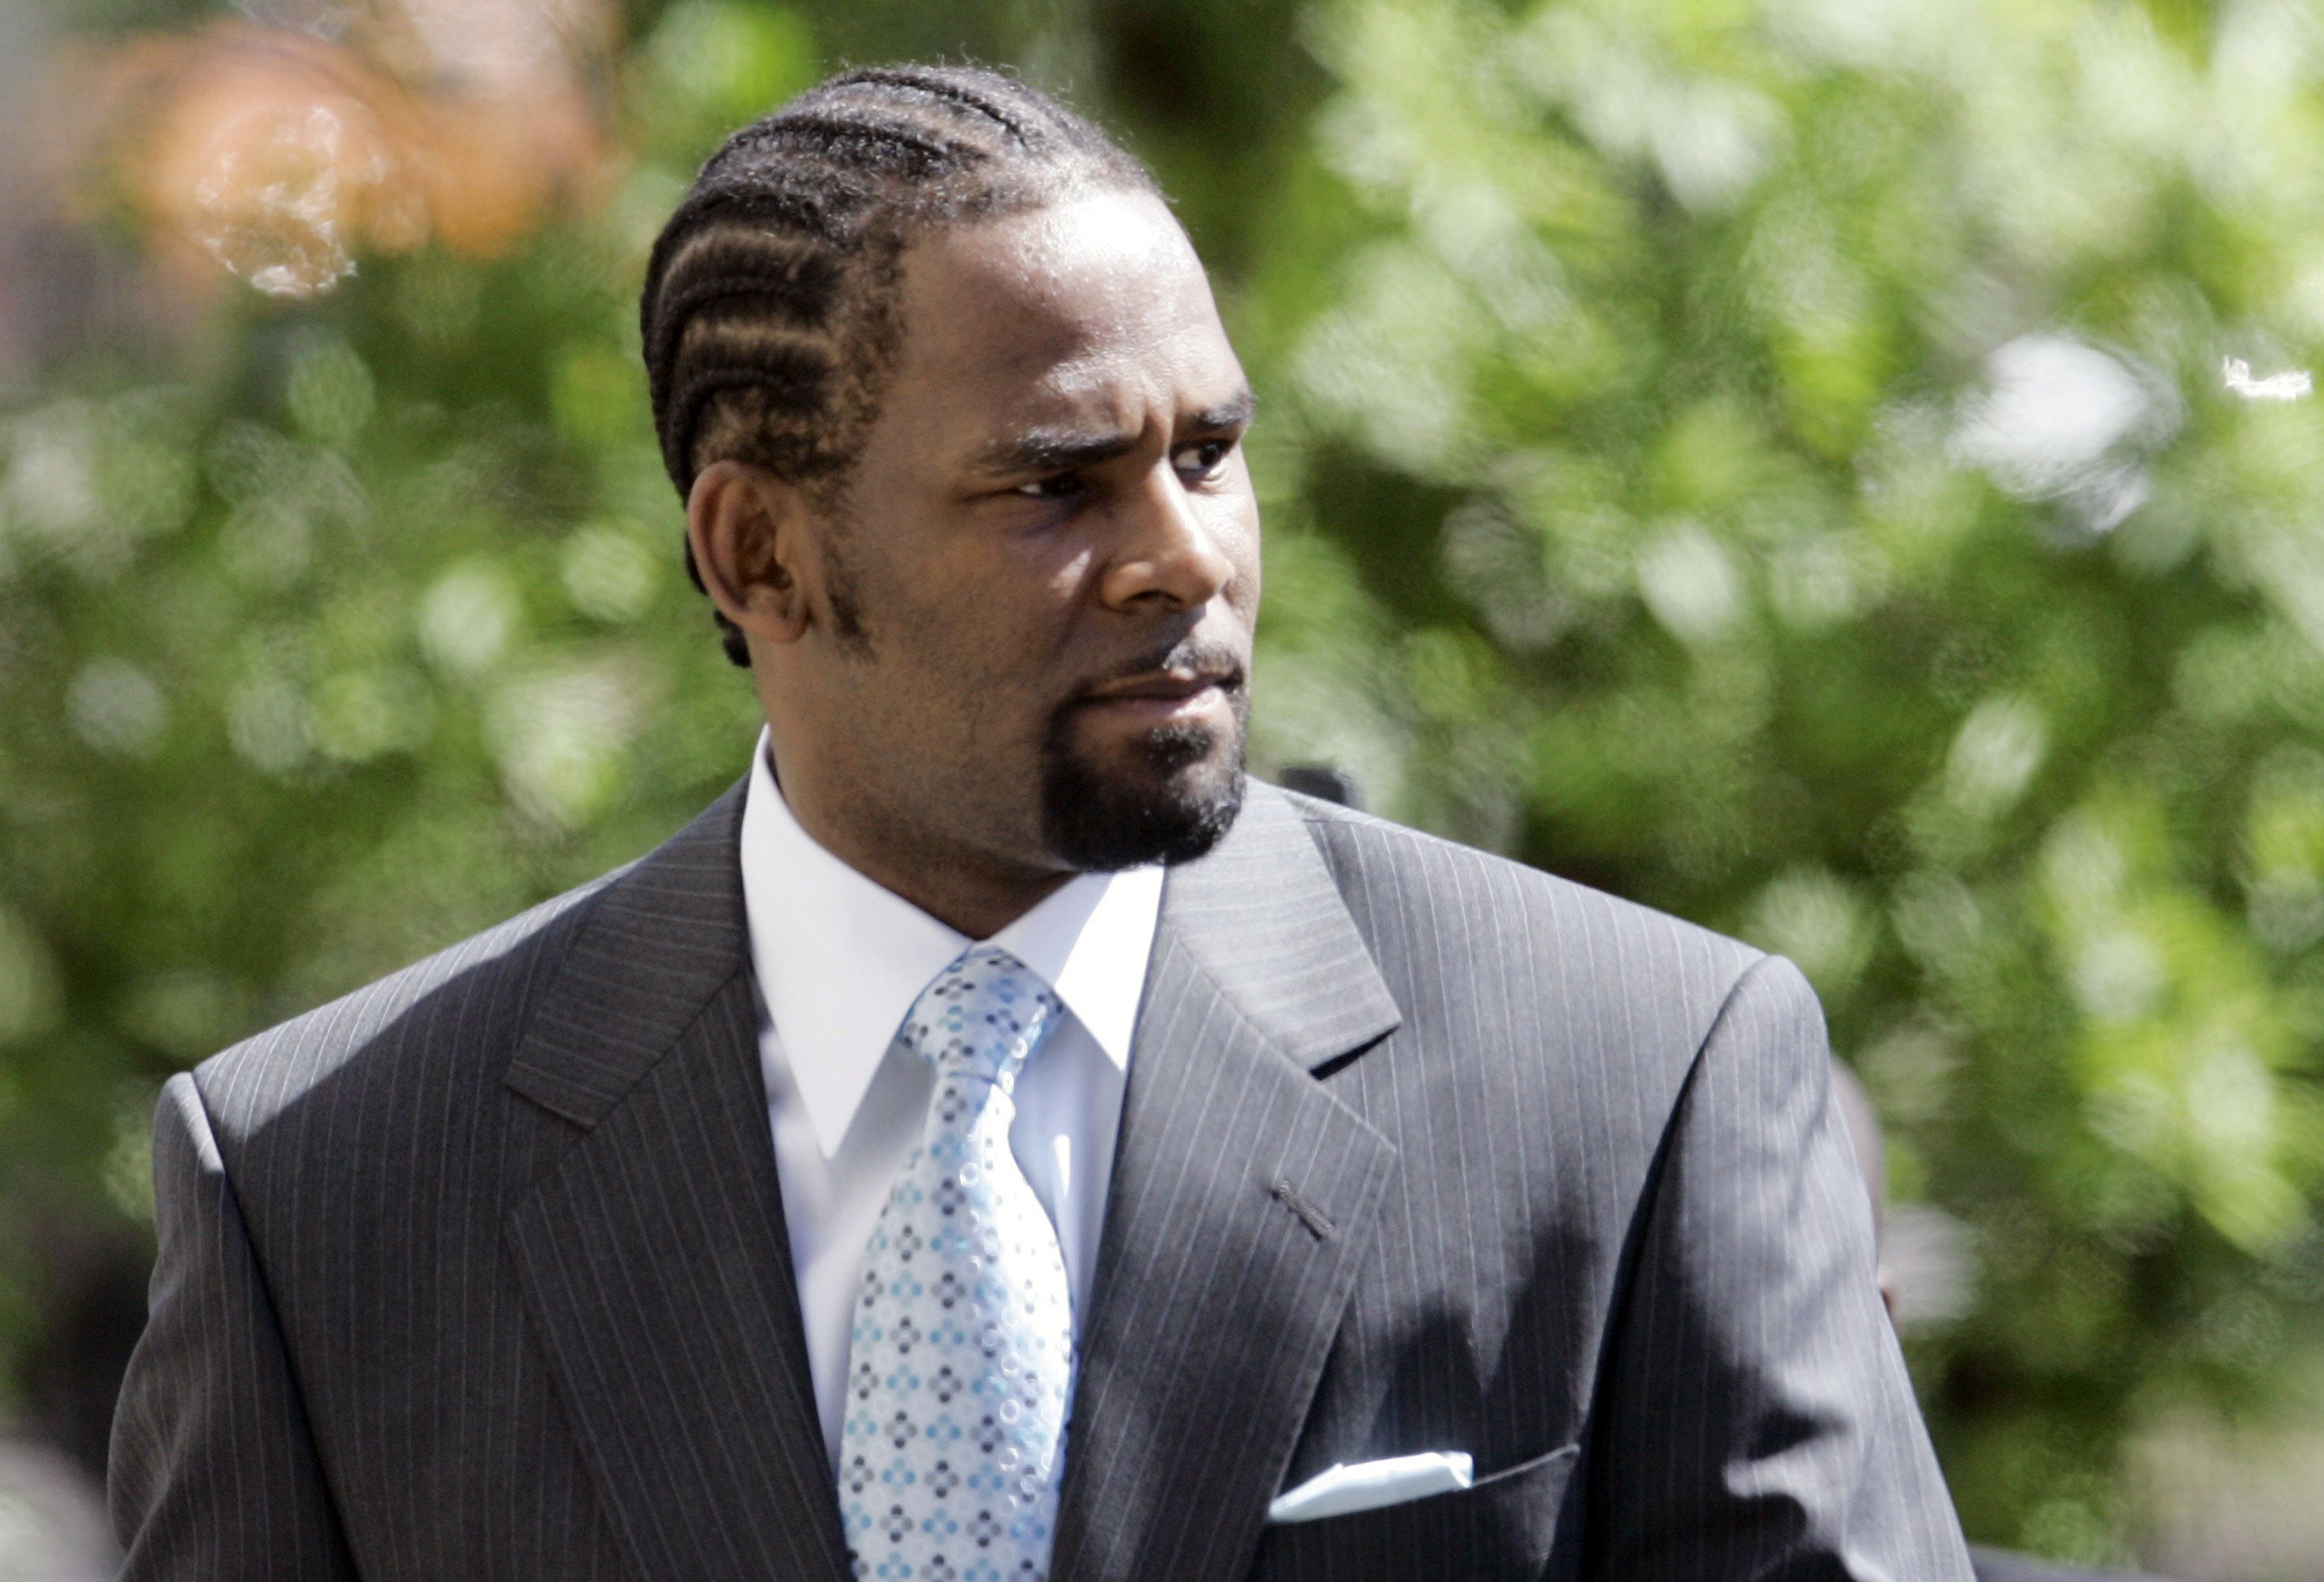 R. Kelly should get at least 25 years in prison